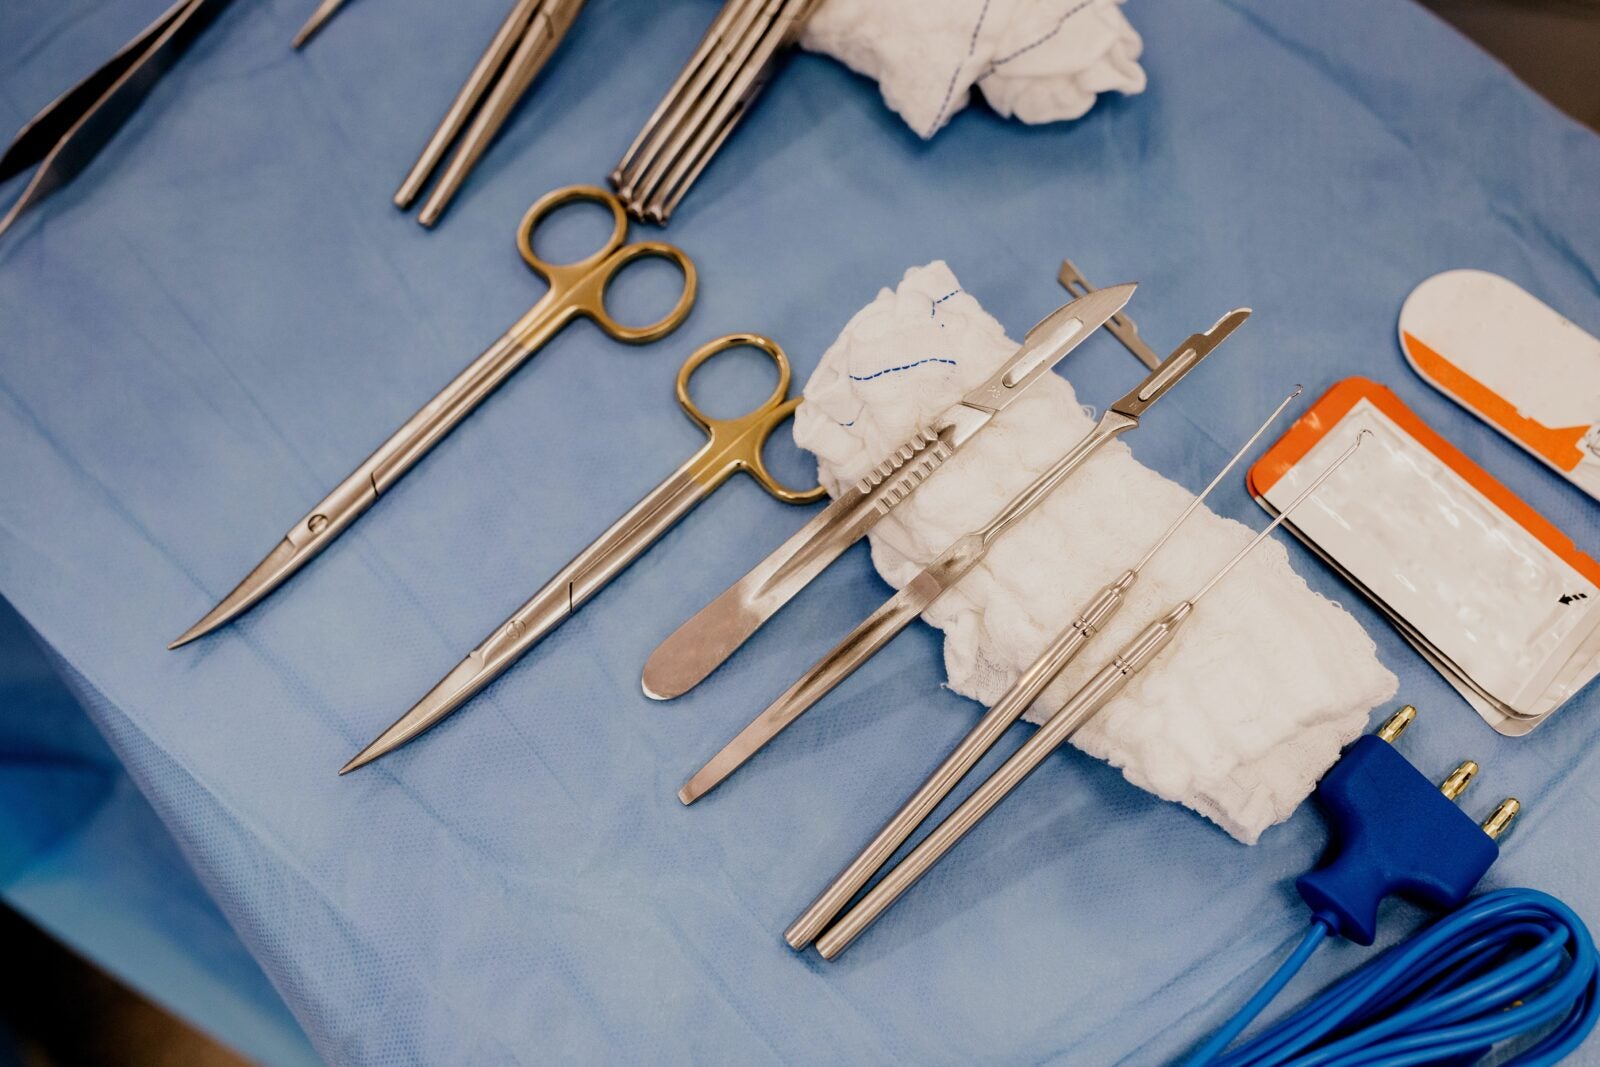 An arrangement of tools for medical attention, which includes scissors, scalpel and others.